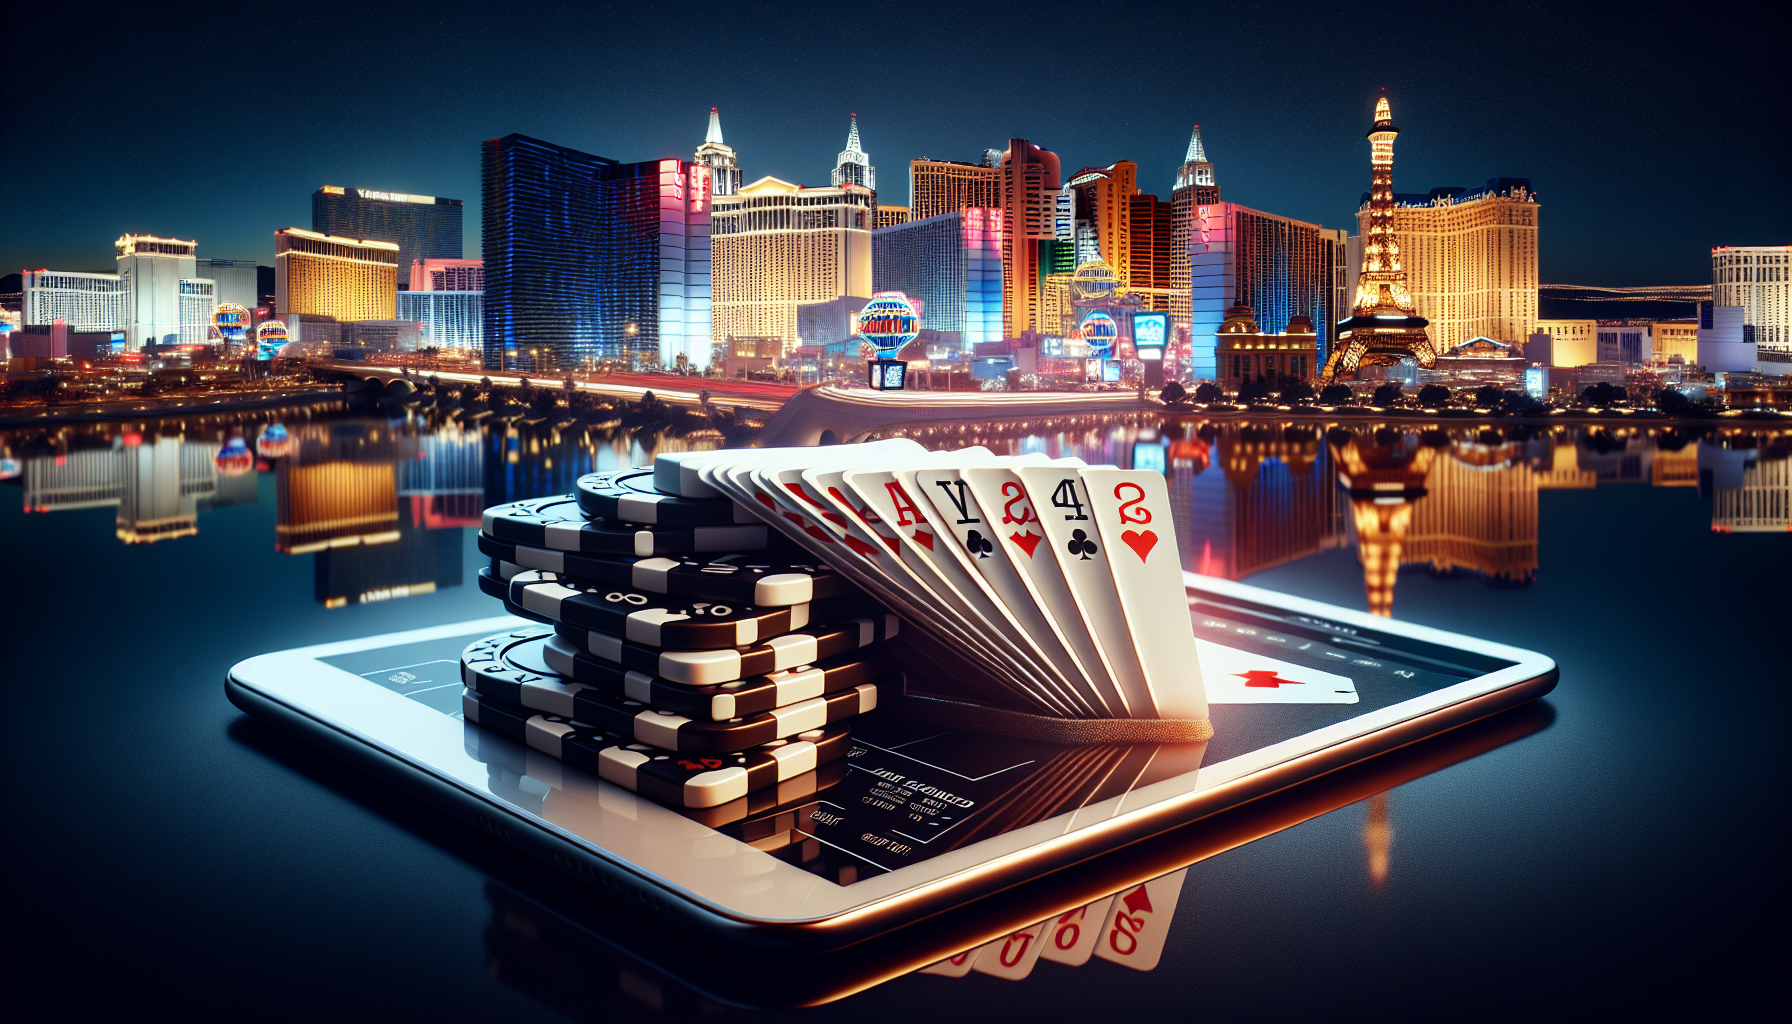 What Are The Rules And Strategies For Playing Blackjack In Las Vegas?